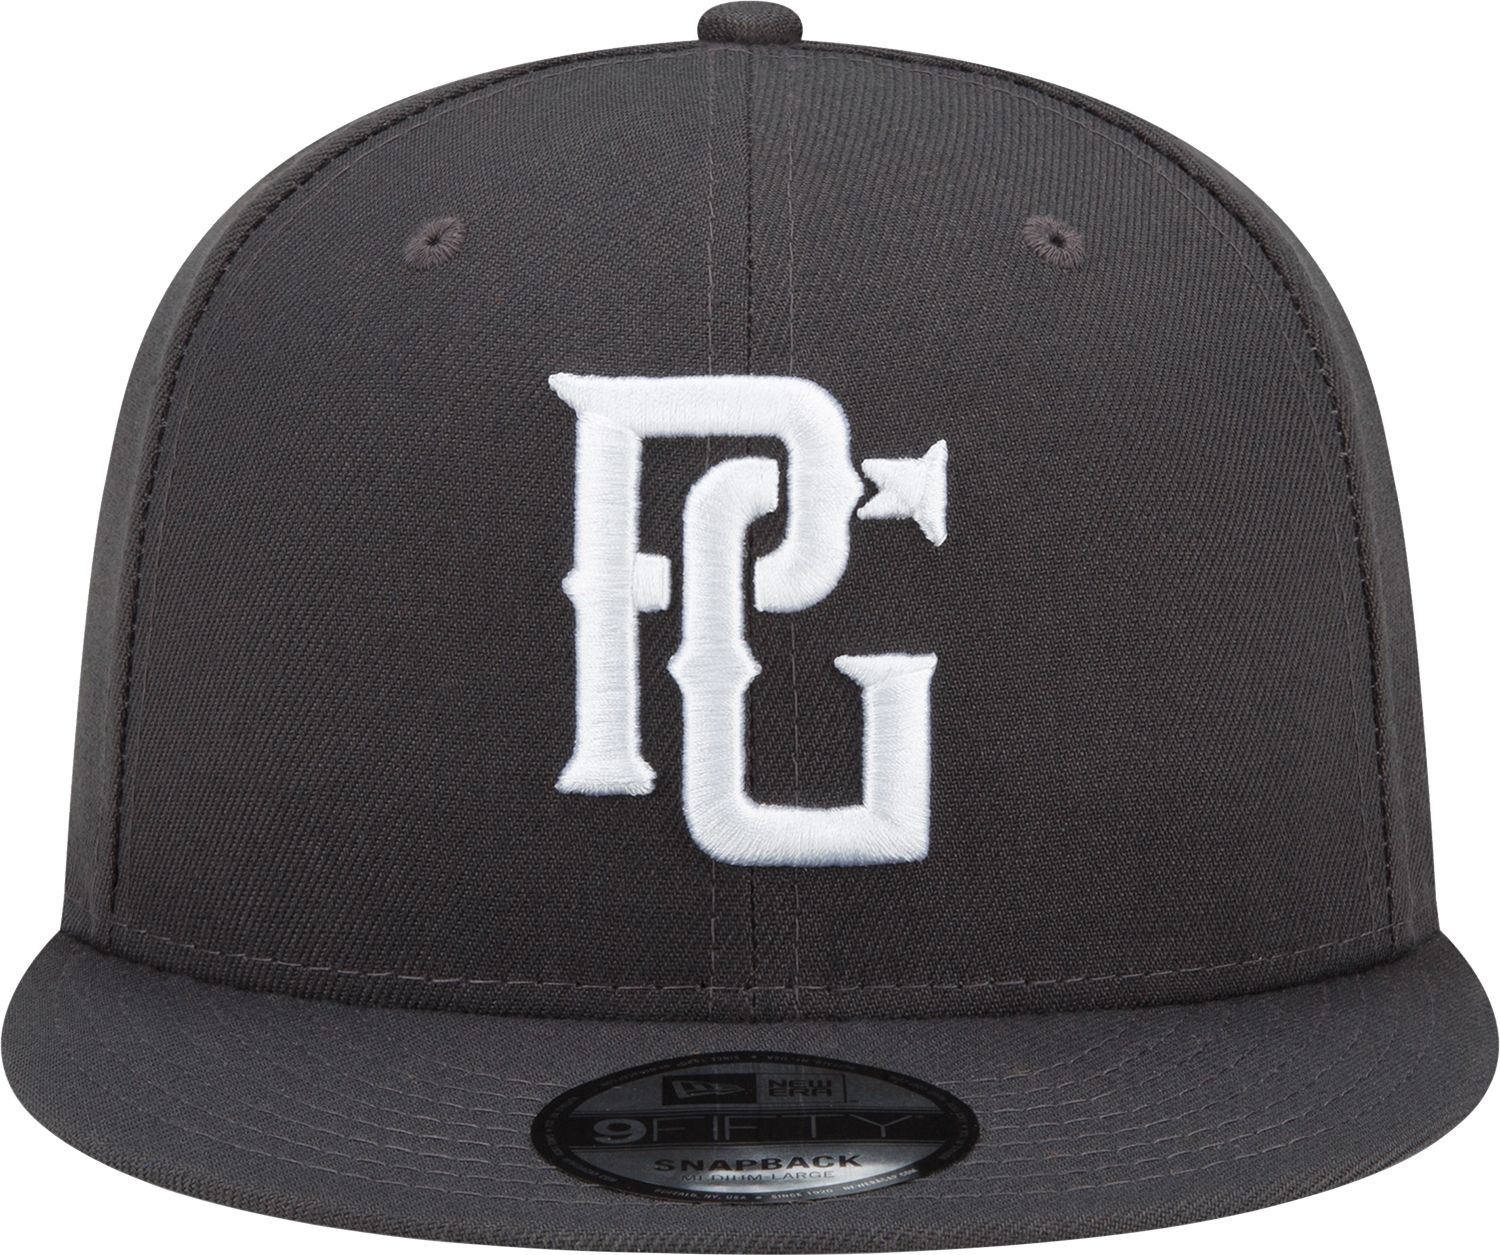 Perfect Game x New Era Adult Chicago 9Fifty Snapback Hat